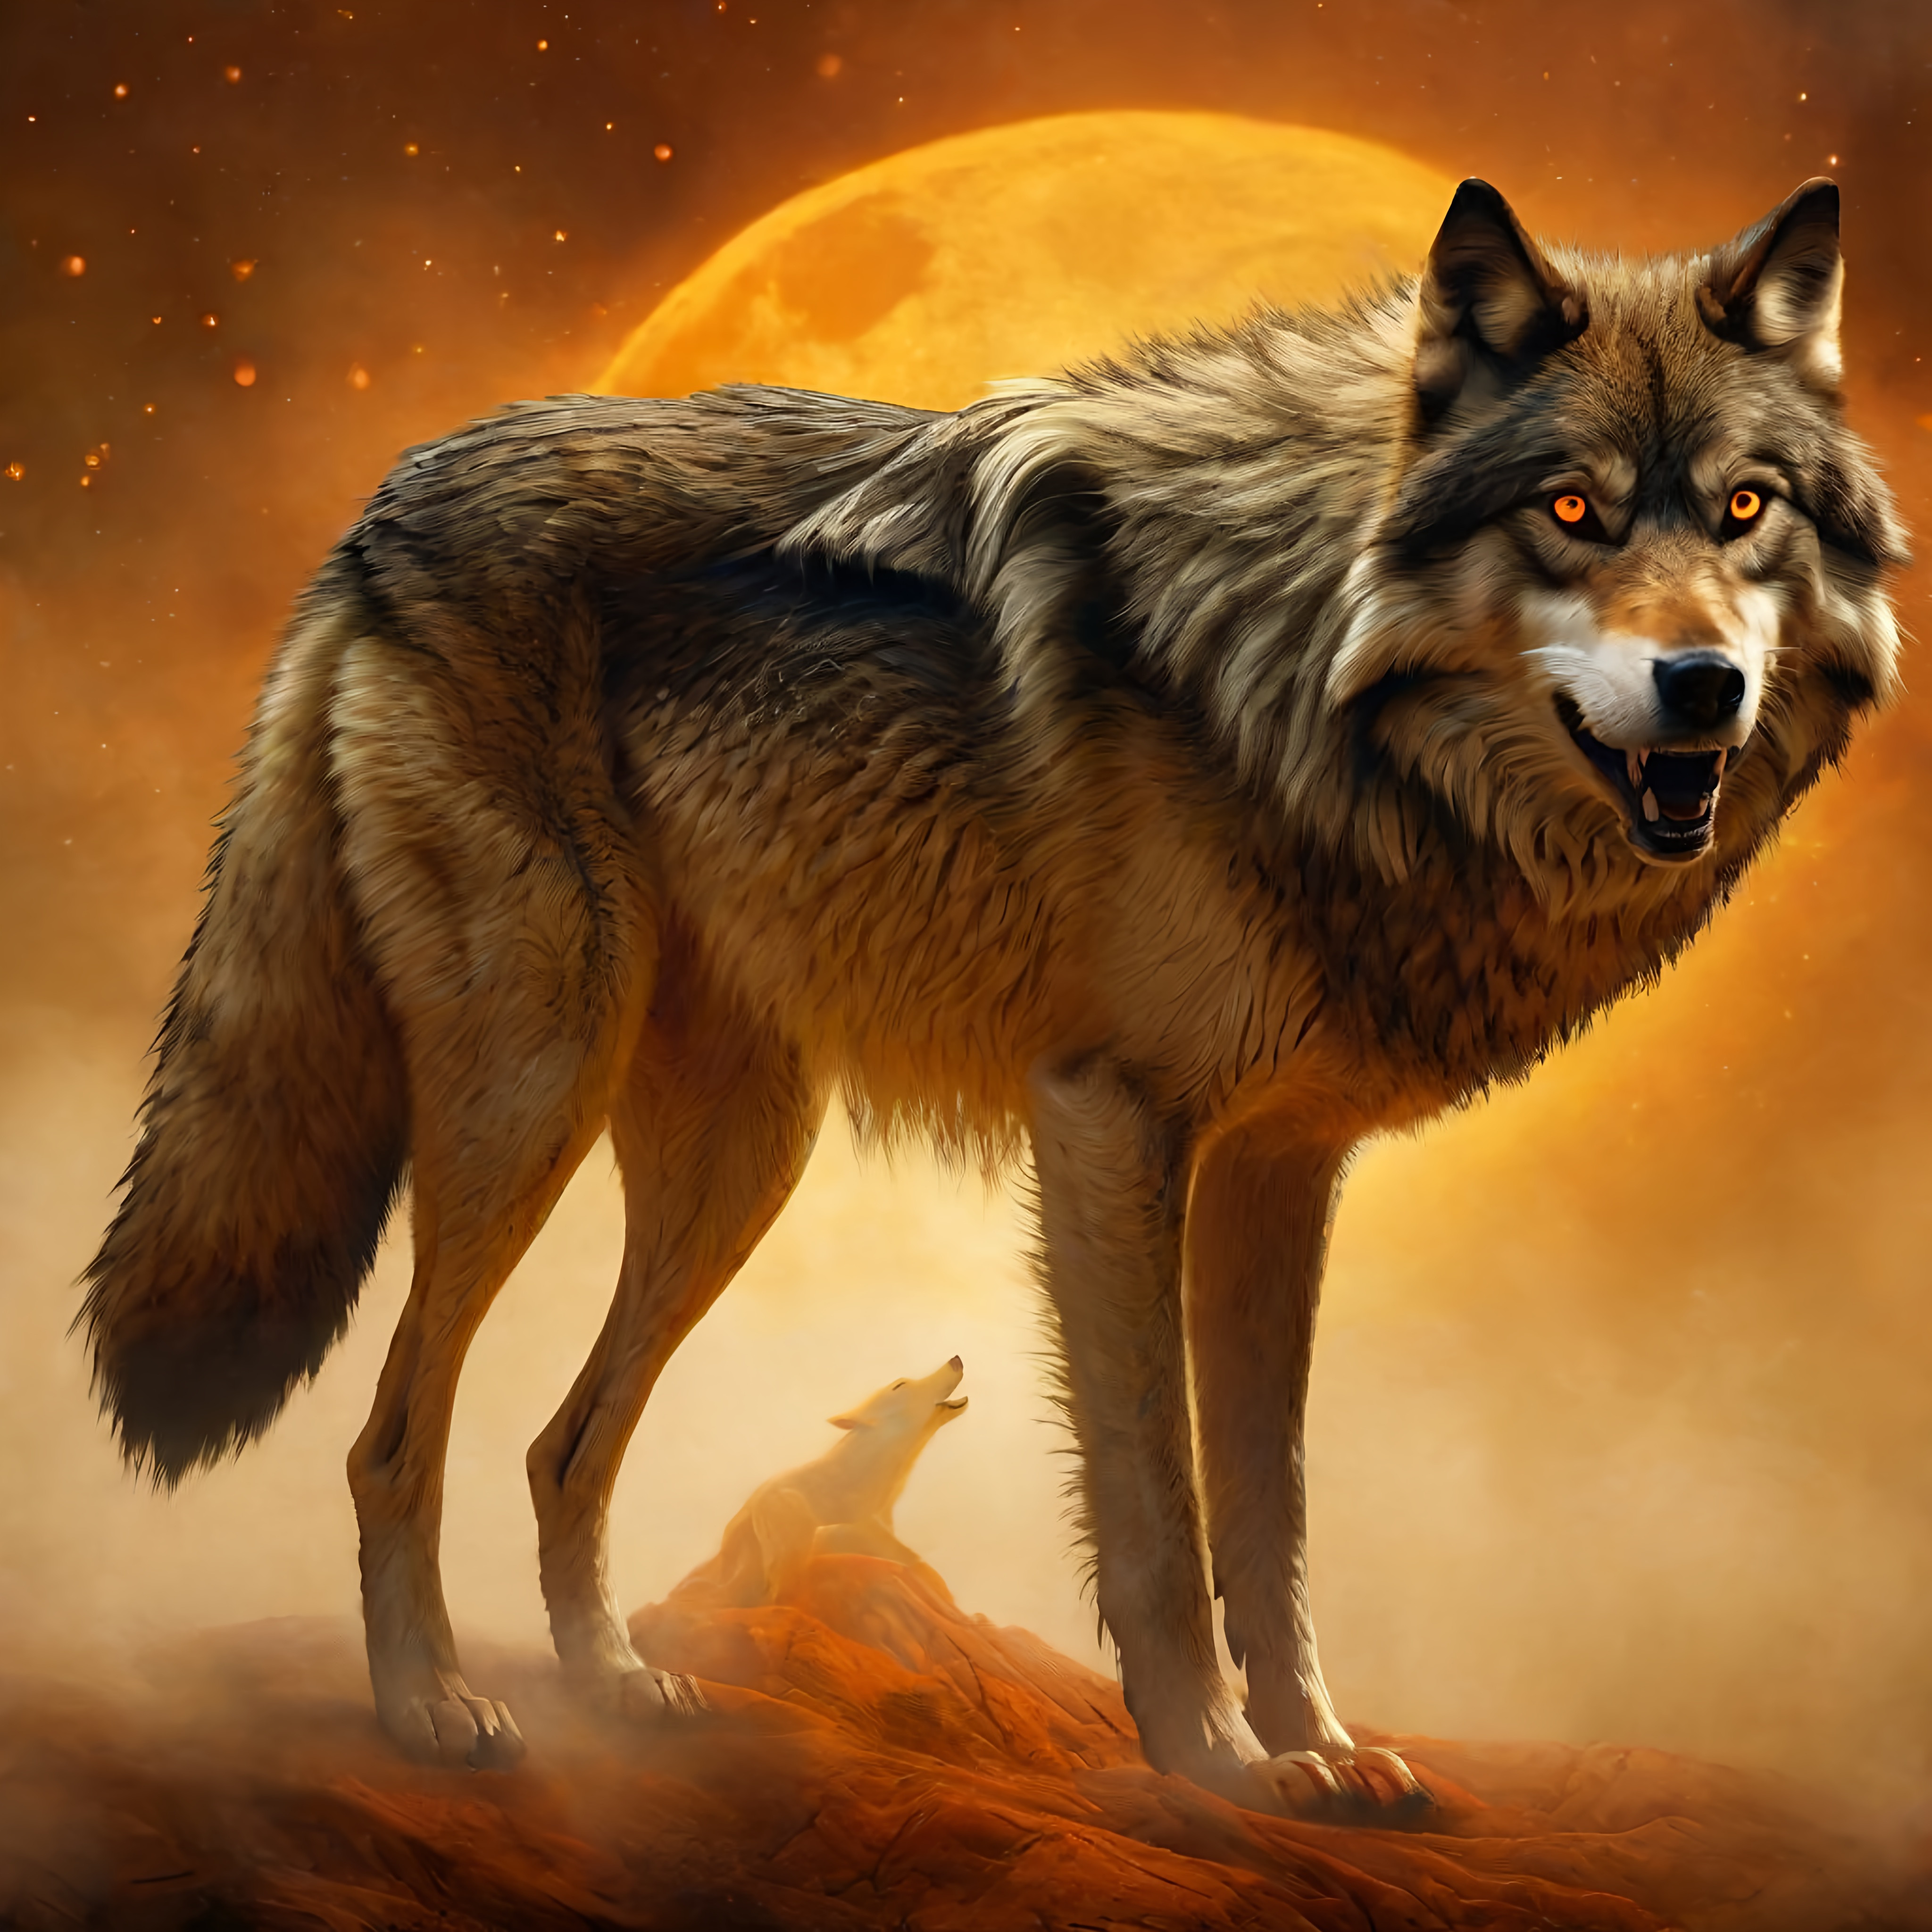 epic wolf howling at {golden moon}, billowing wild f...